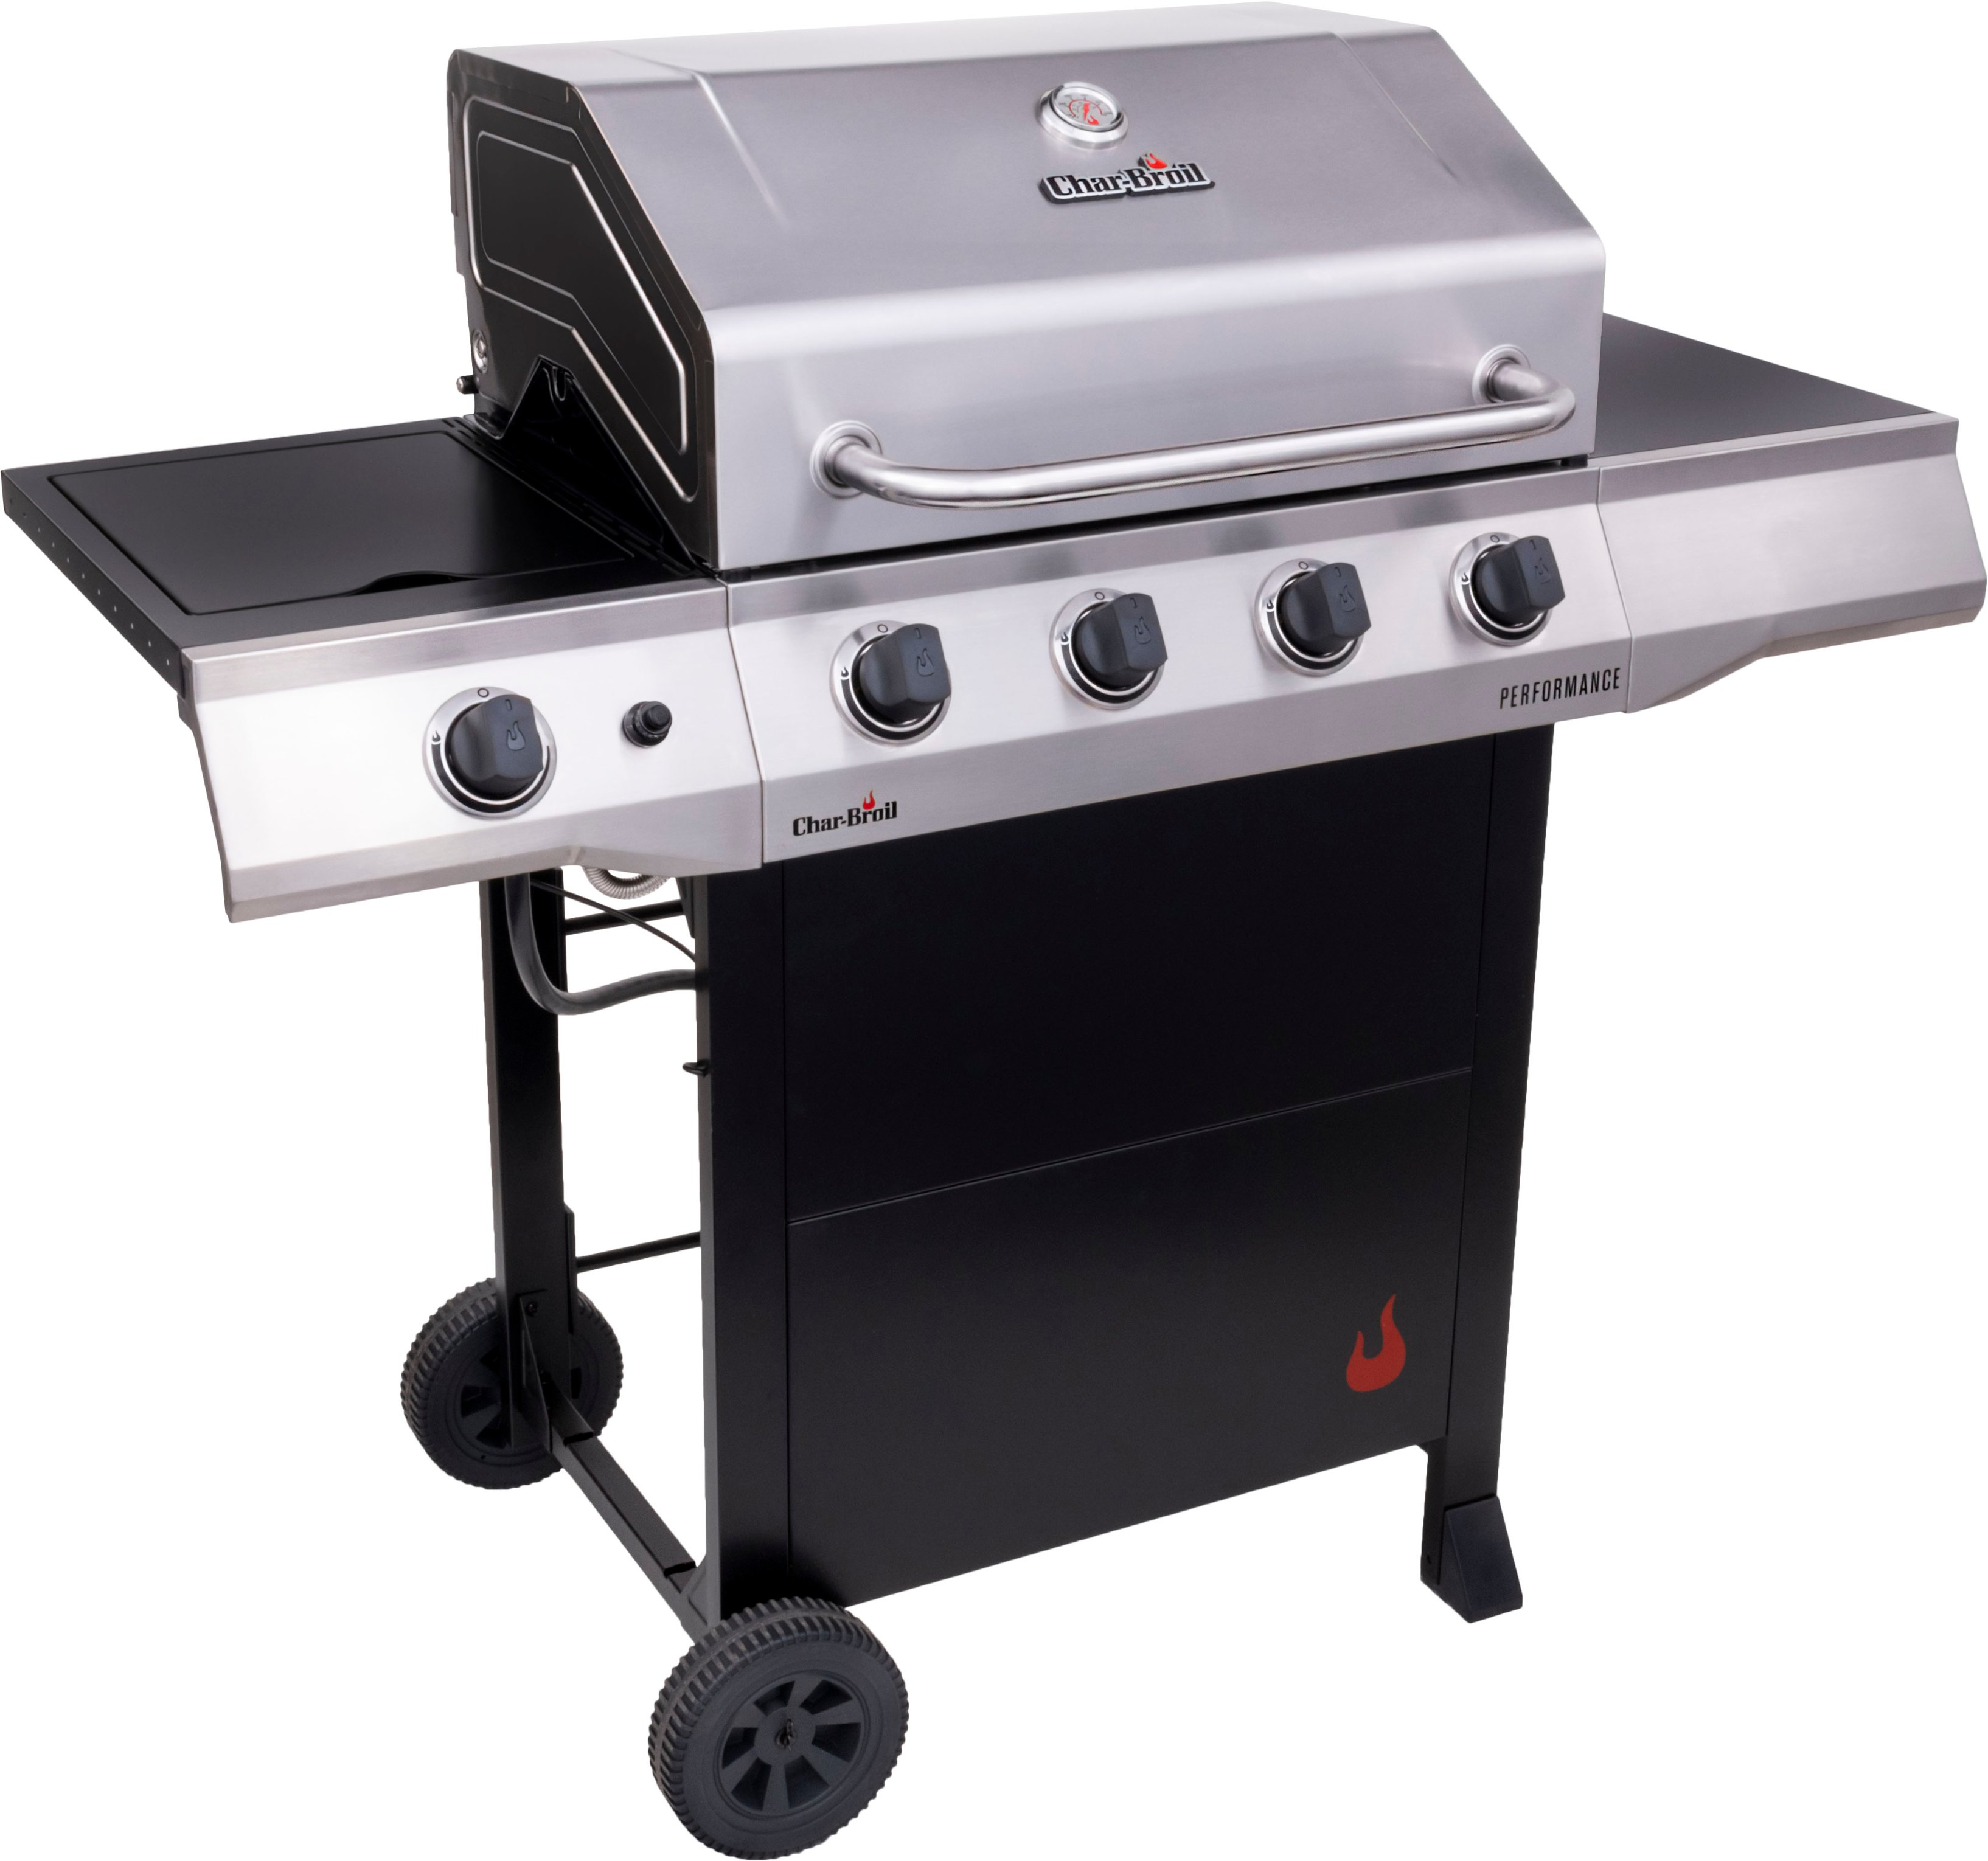 Char-Broil Performance Series 4-Burner Gas Grill Stainless Steel_Black Char Broil 4 Burner Stainless Steel Gas Grill